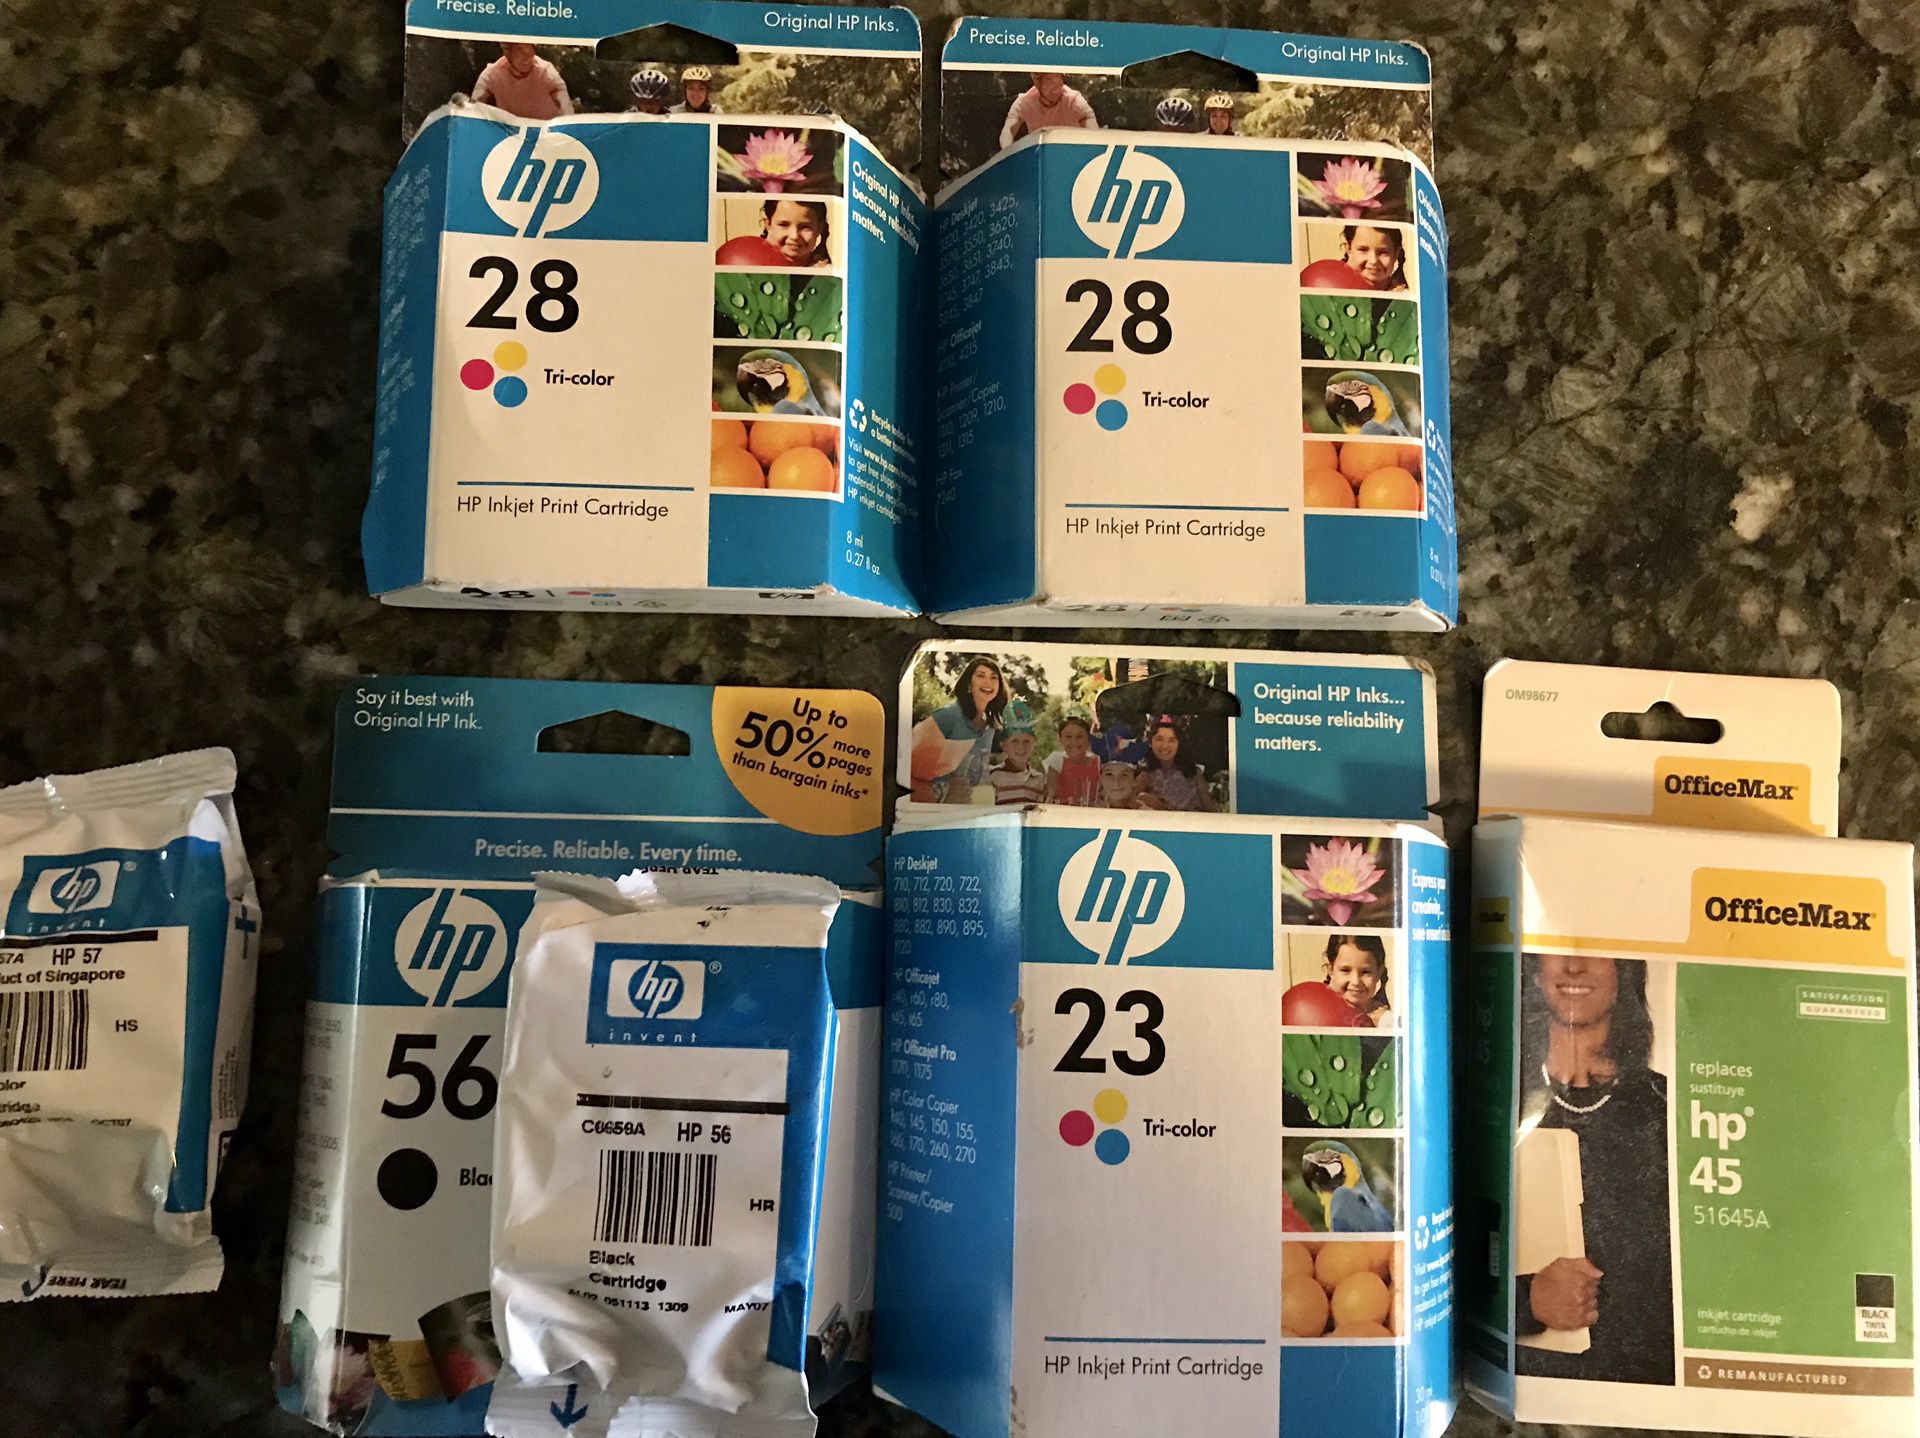 HP Tri-color and Black Ink Cartridges (new/unopened)